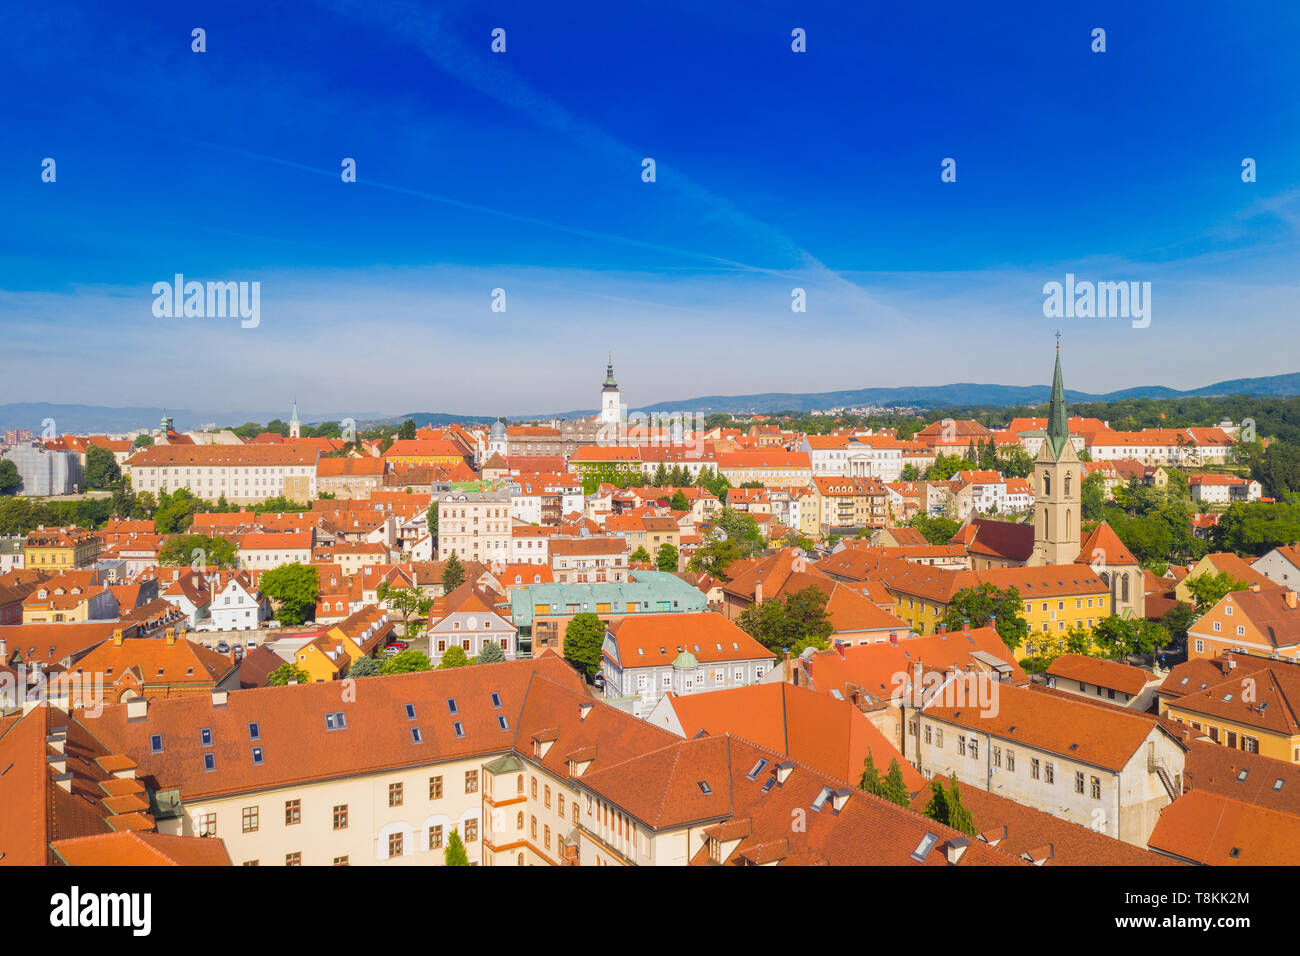 Croatia, panoramic view on Upper town in Zagreb, red roofs and palaces of old baroque center Stock Photo